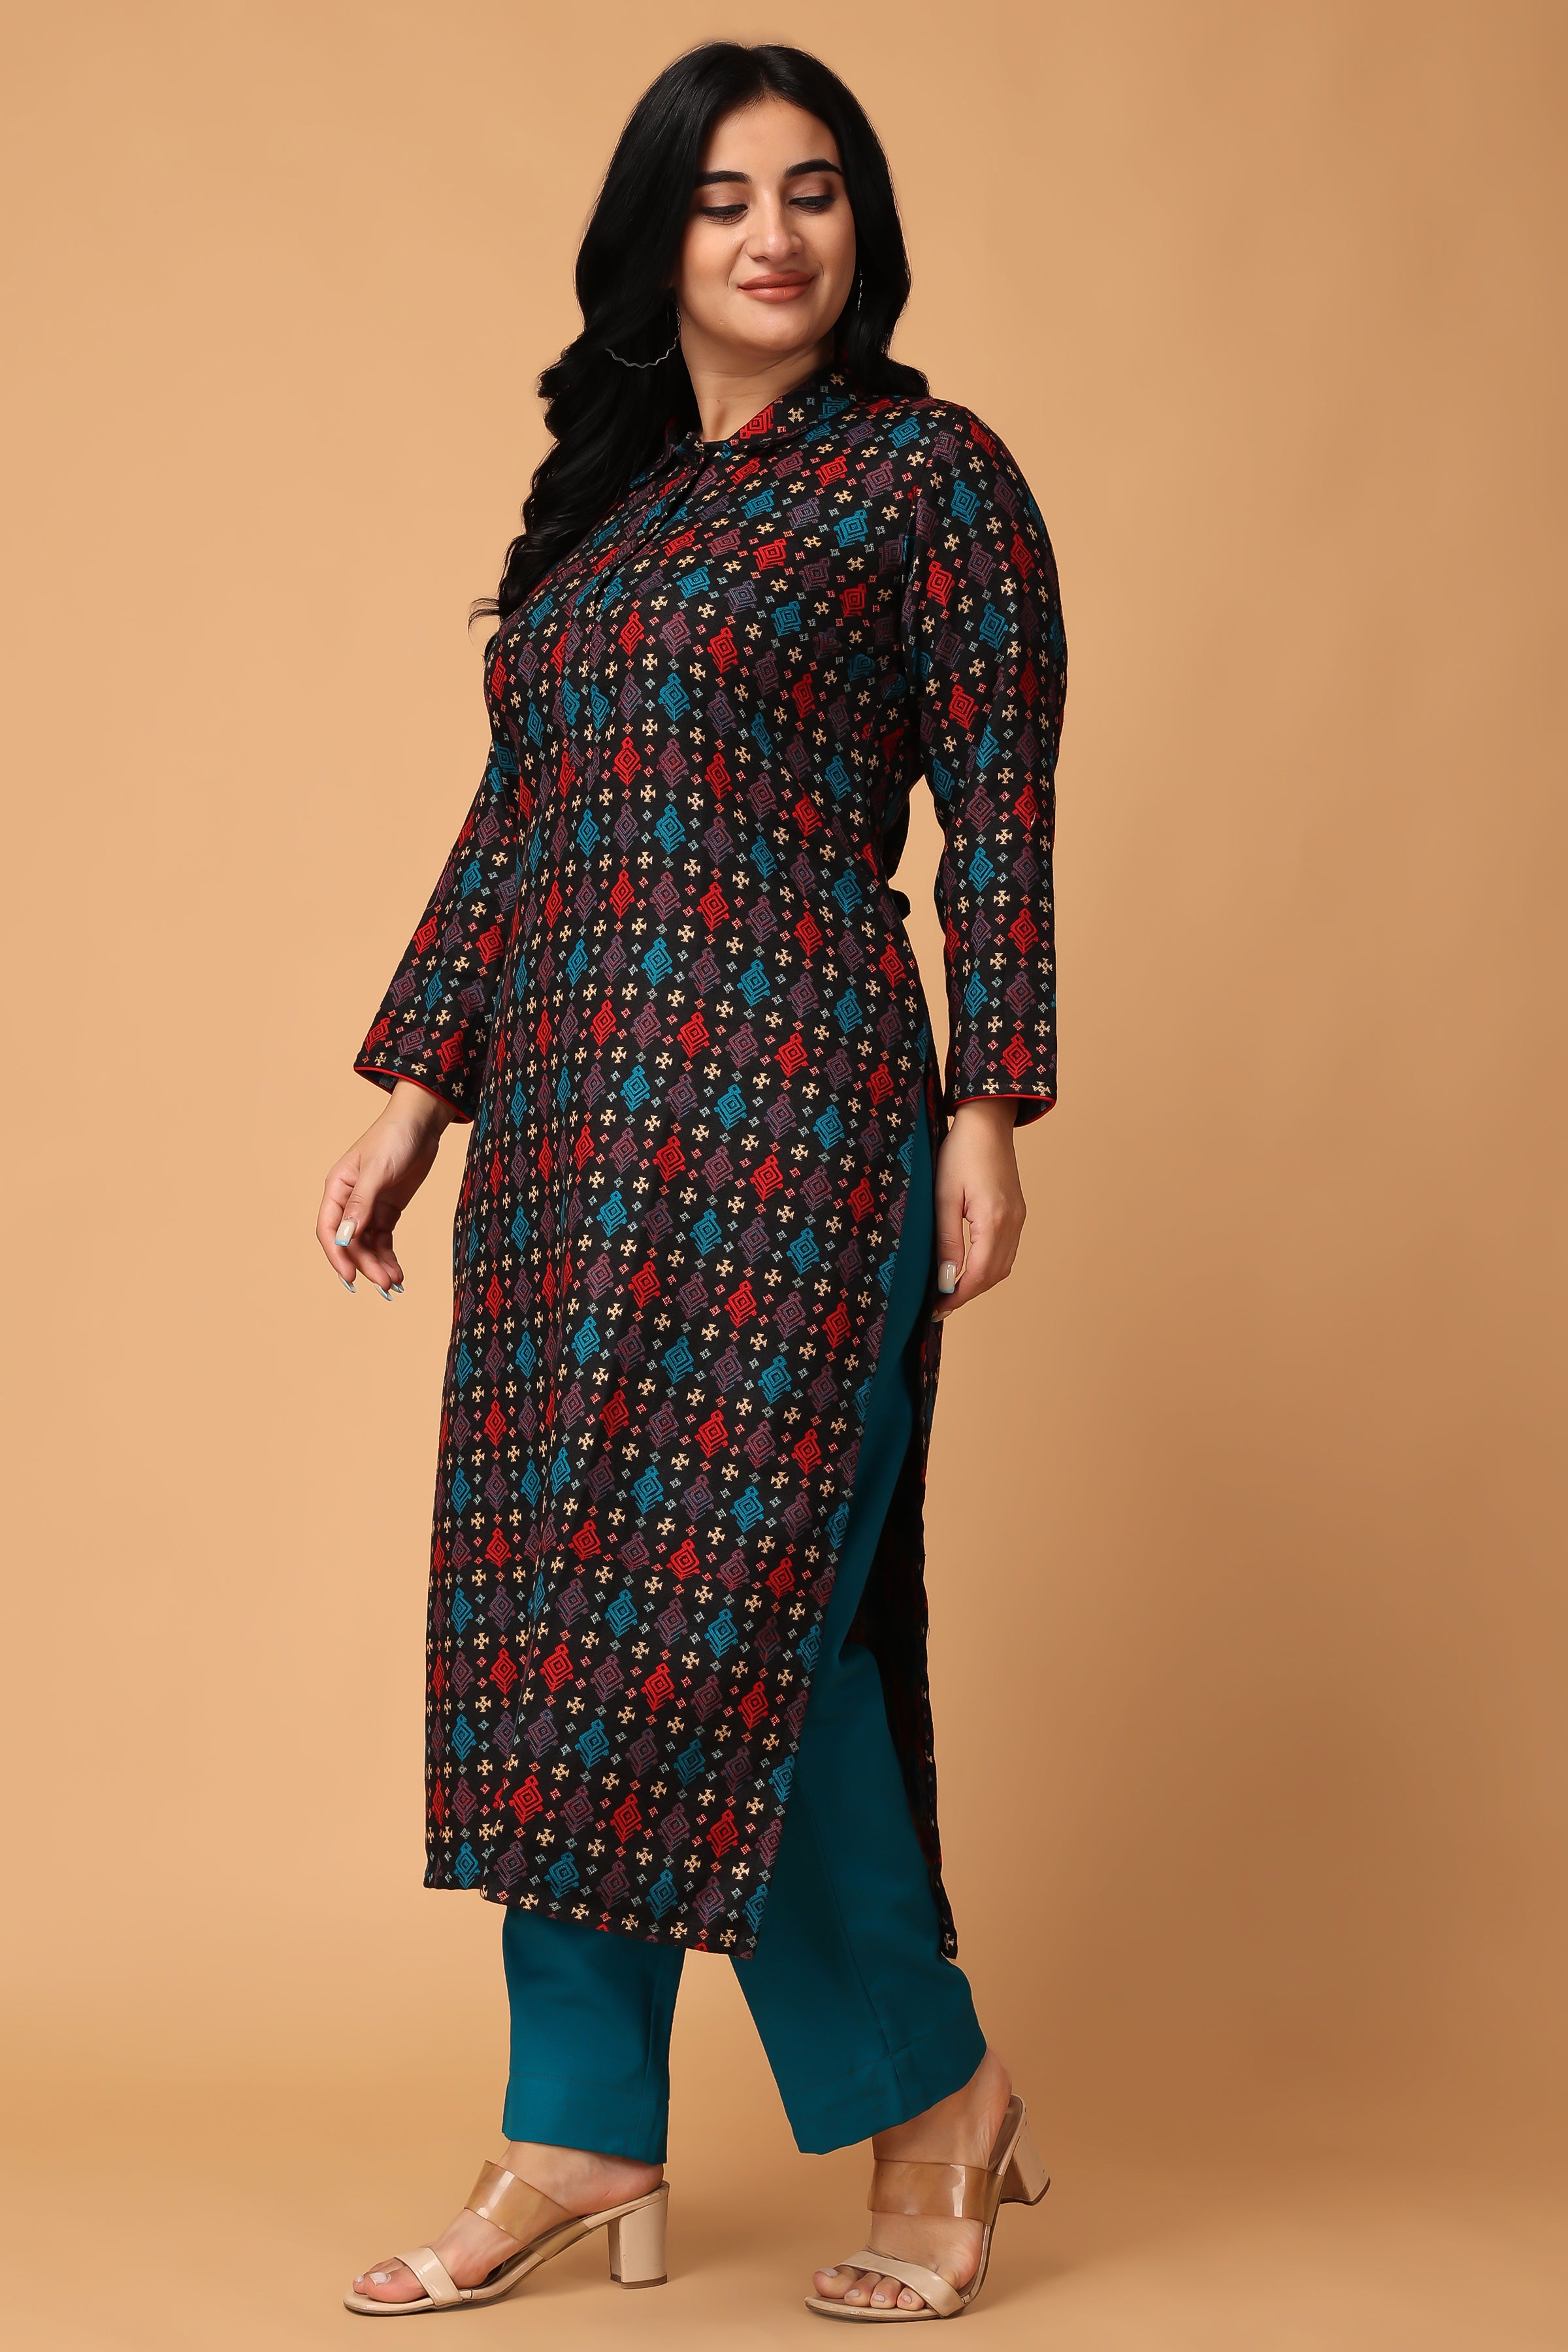 Cotton Semi-Formal New Western Style Collection at Rs 750/piece in Surat